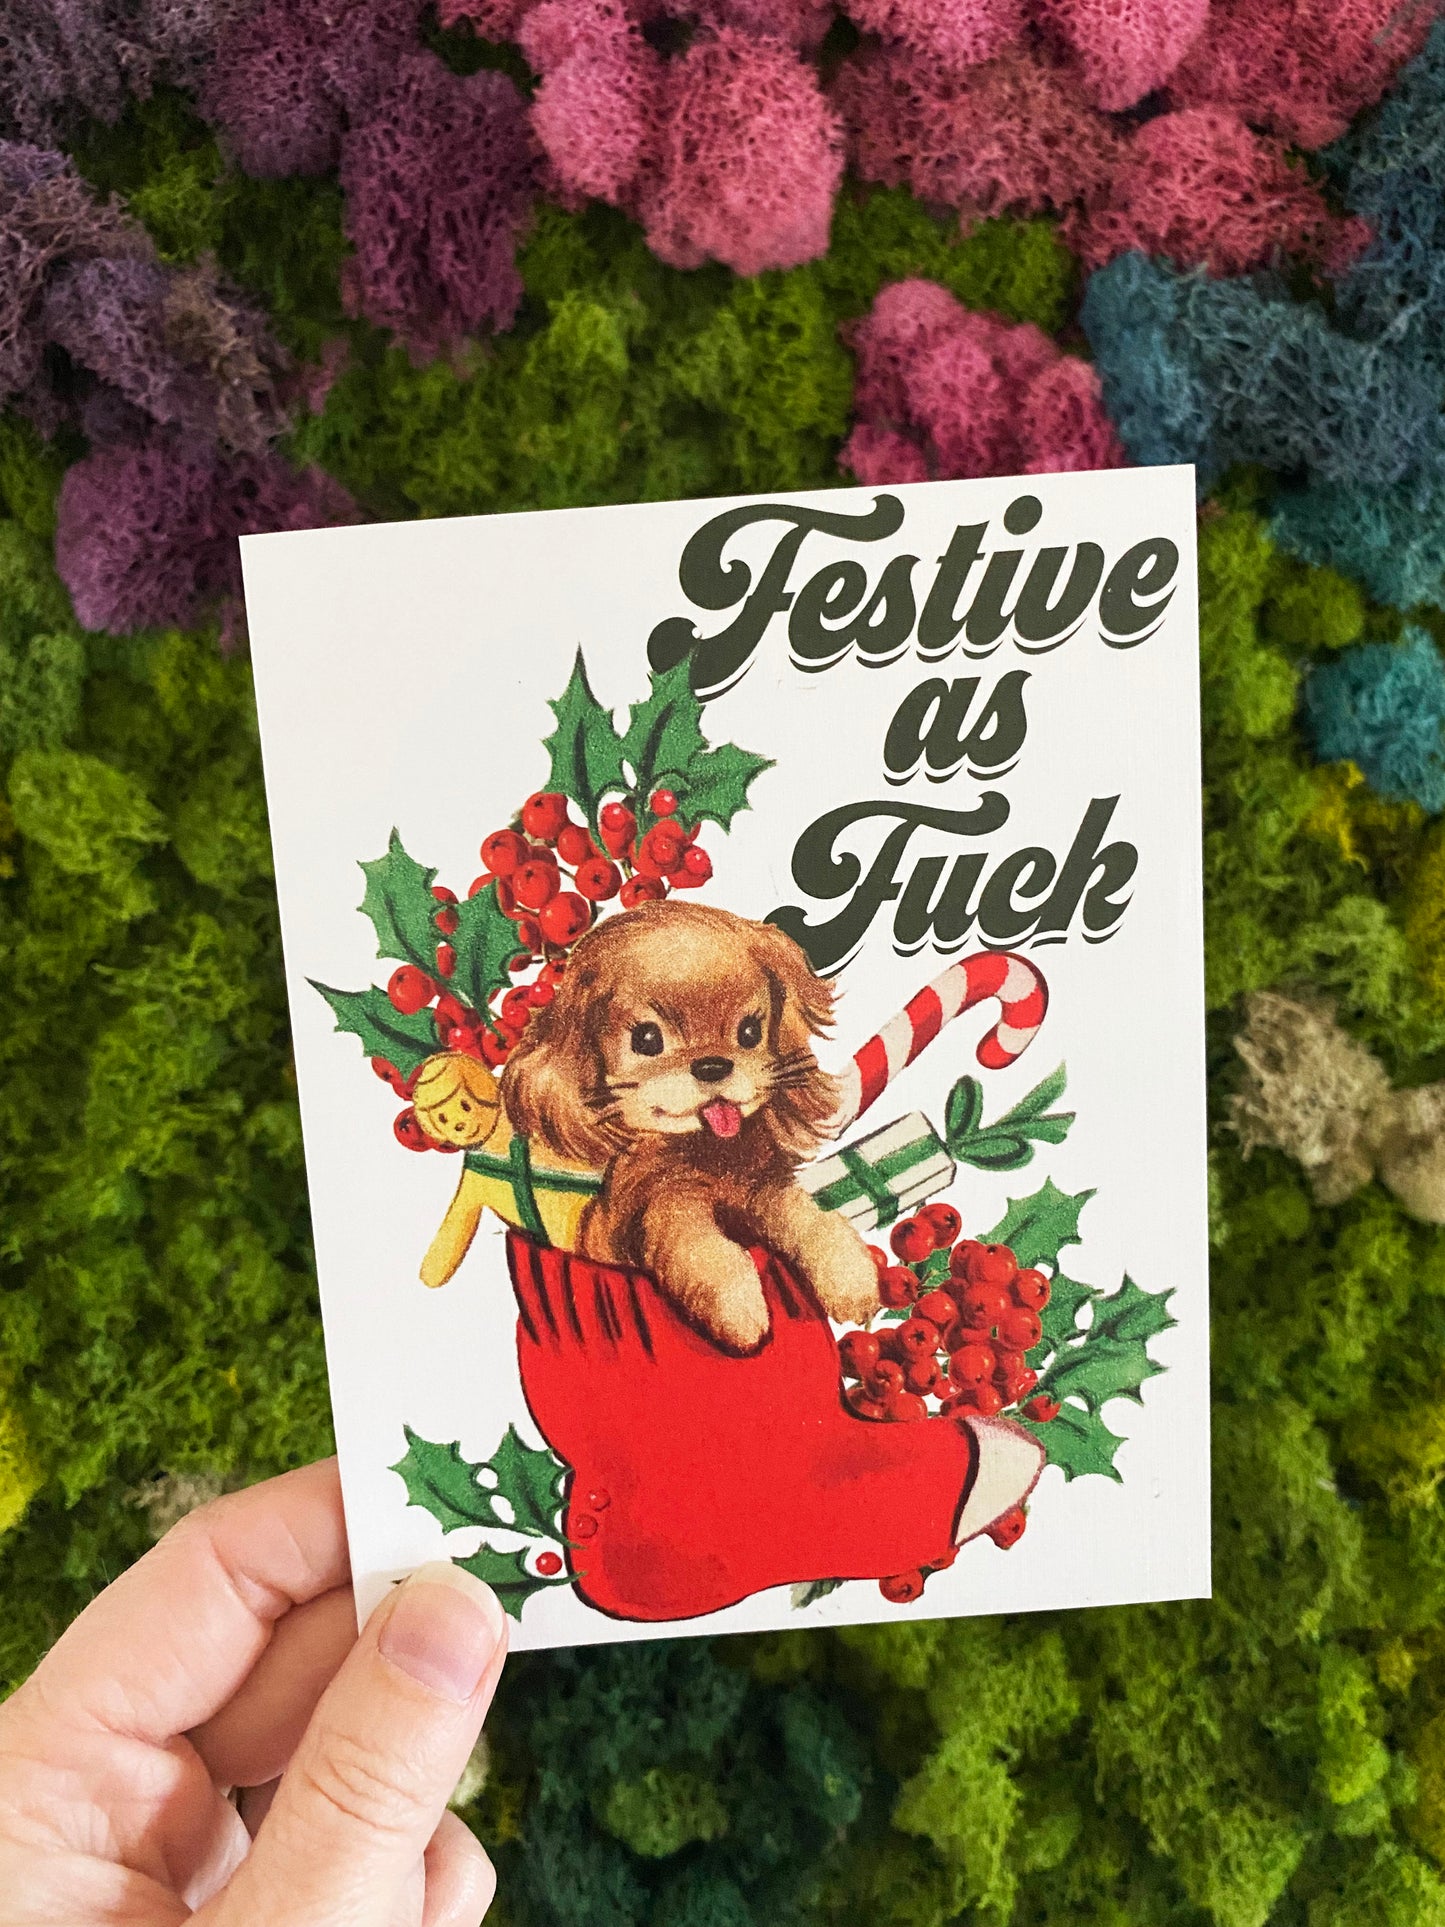 retro vintage classic holiday card jolly silly funny fun dog puppy inside stocking sock red cute candy cane gingerbread man christmas xmas coin laundry blank inside party gift friend boyfriend girlfriend coin laundry